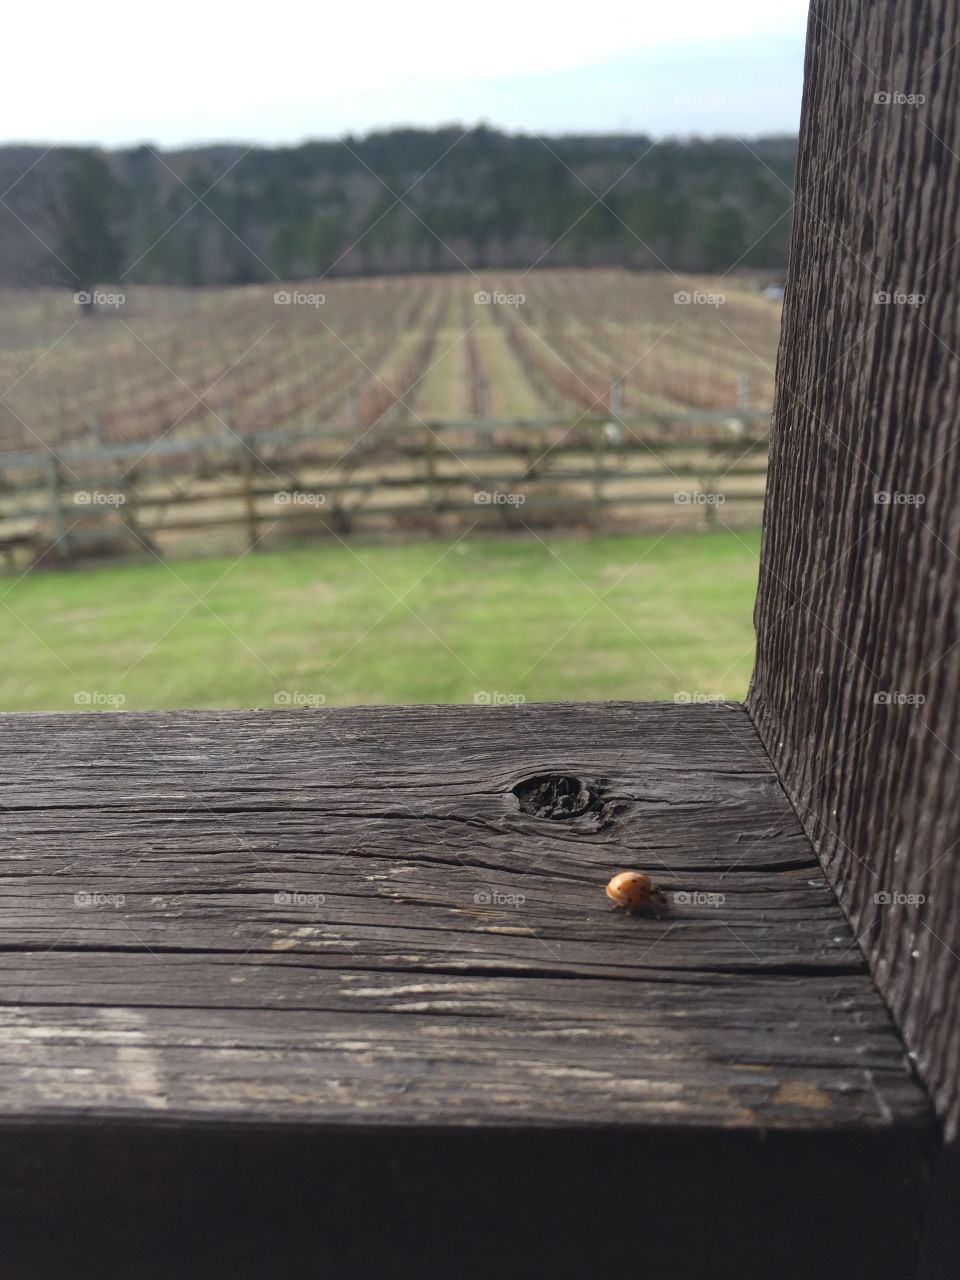 Lady bug point of view of the vineyard